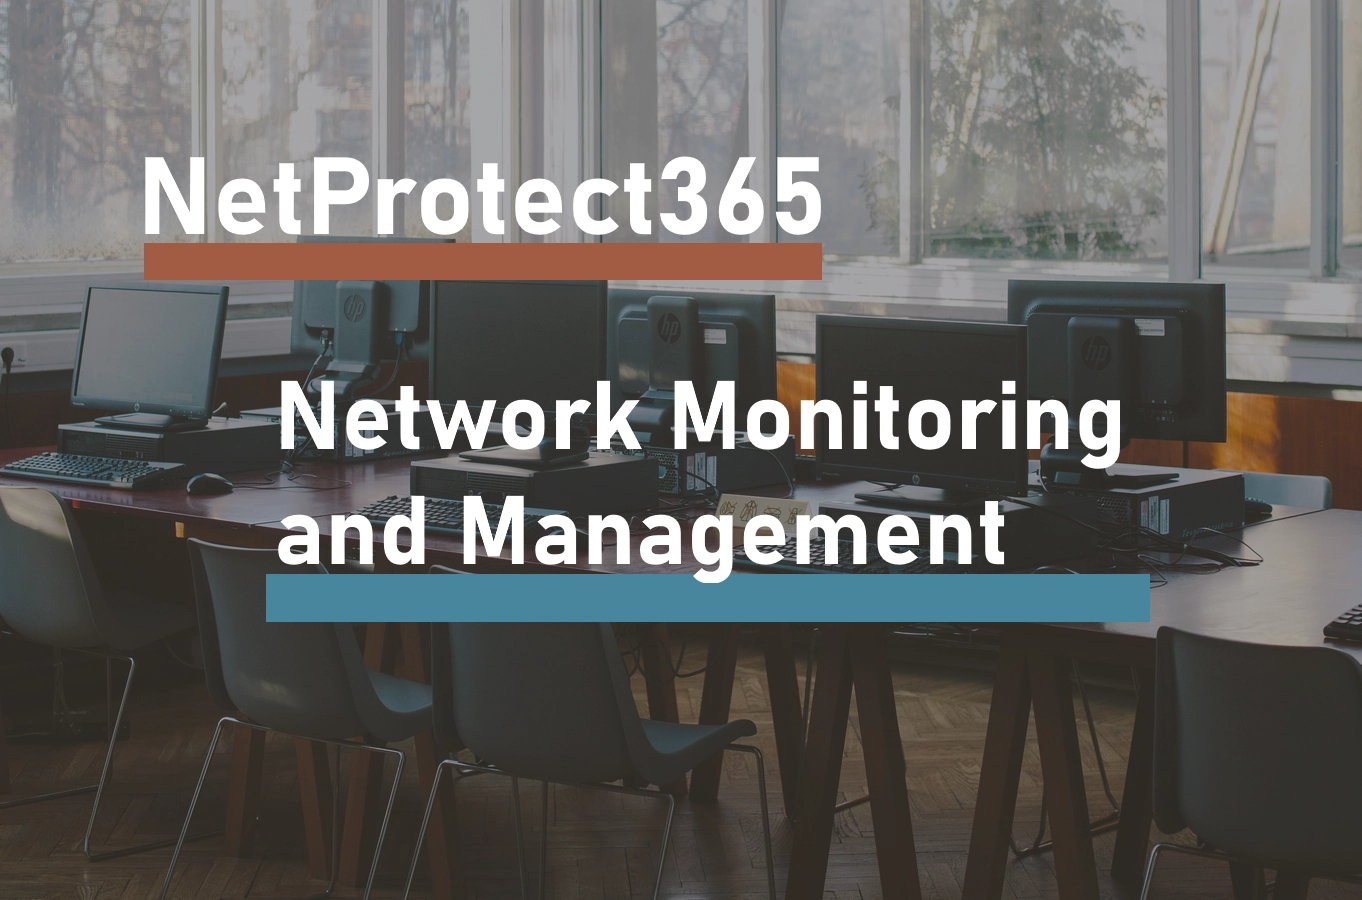 NetProtect365 | Network Monitoring and Management